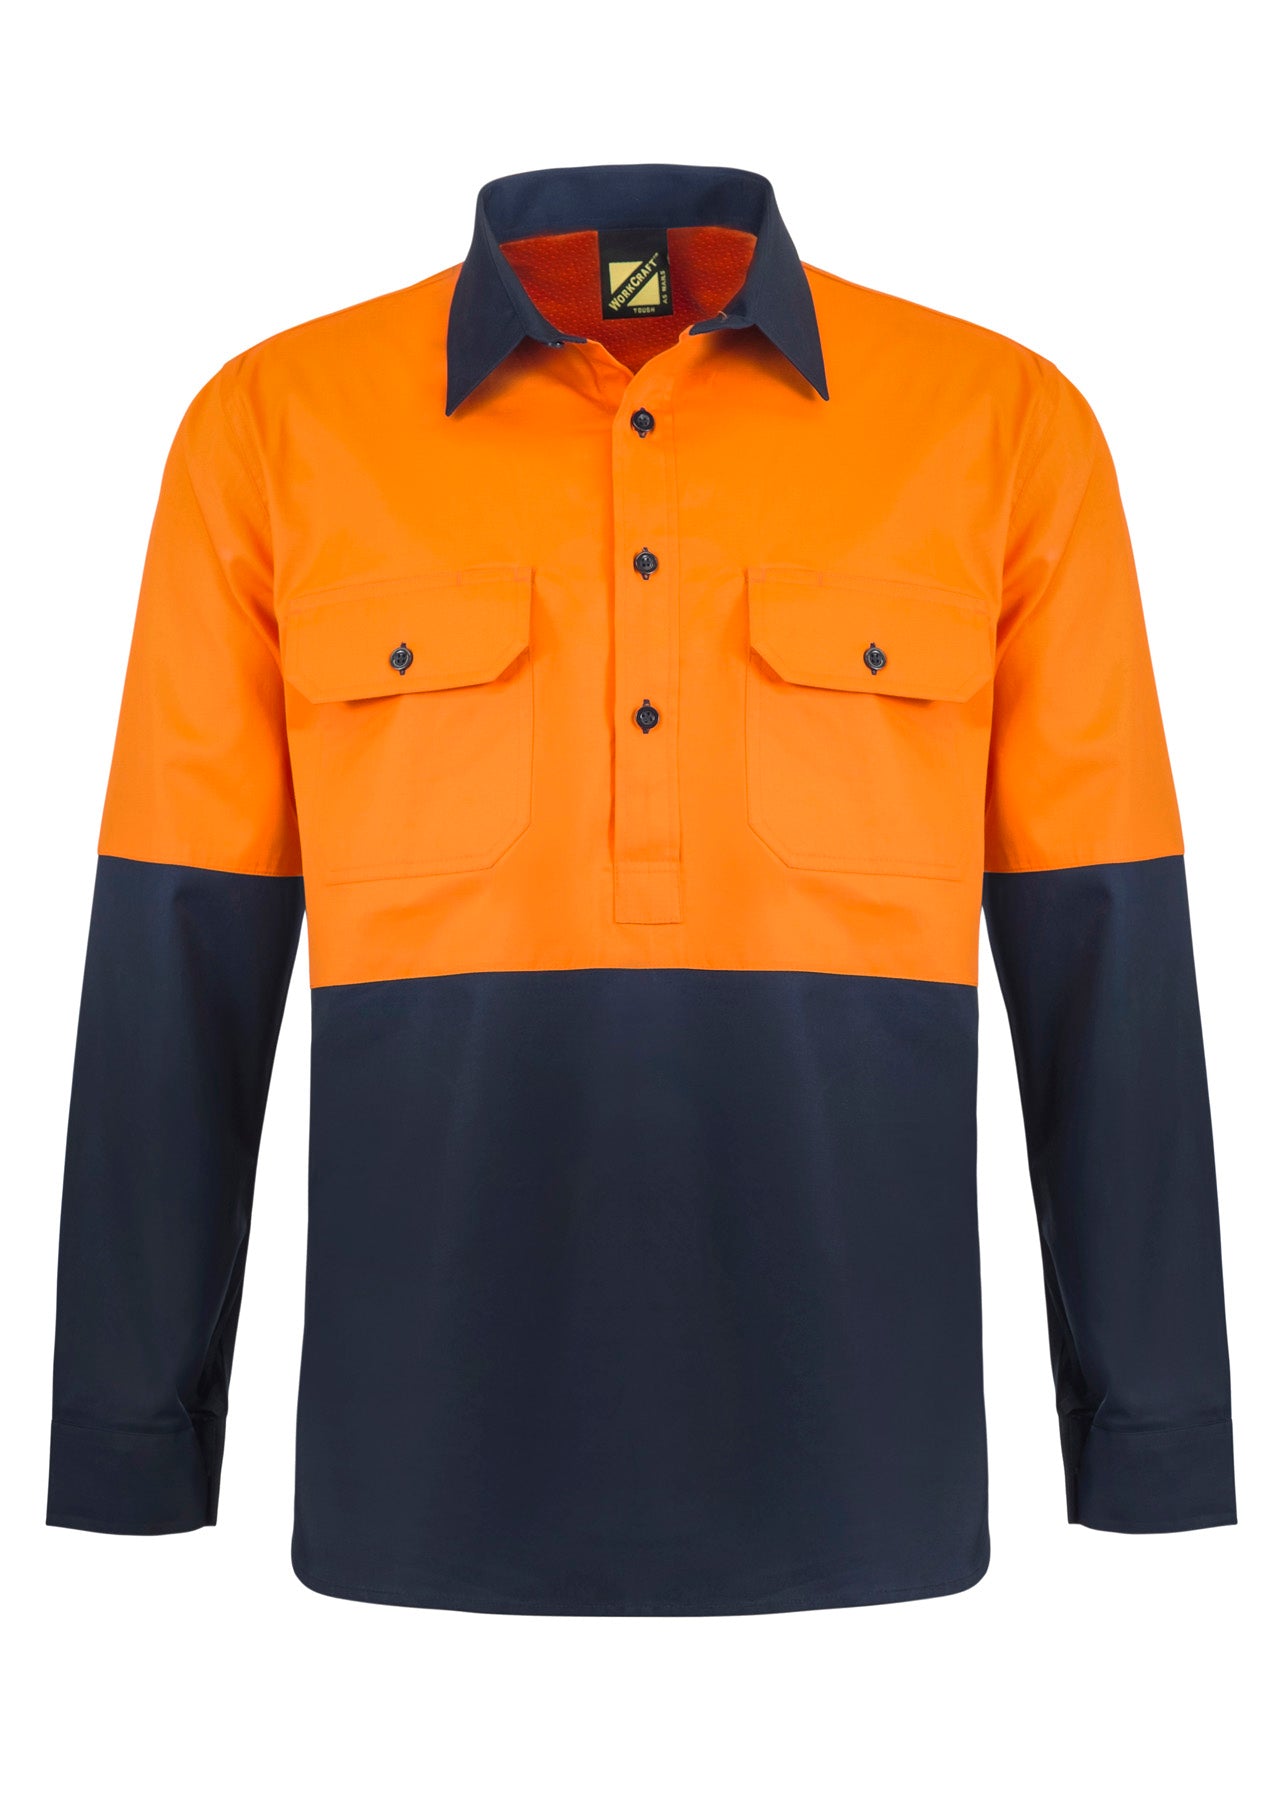 2 Tone Half Placket Shirt With Vent - made by Workcraft